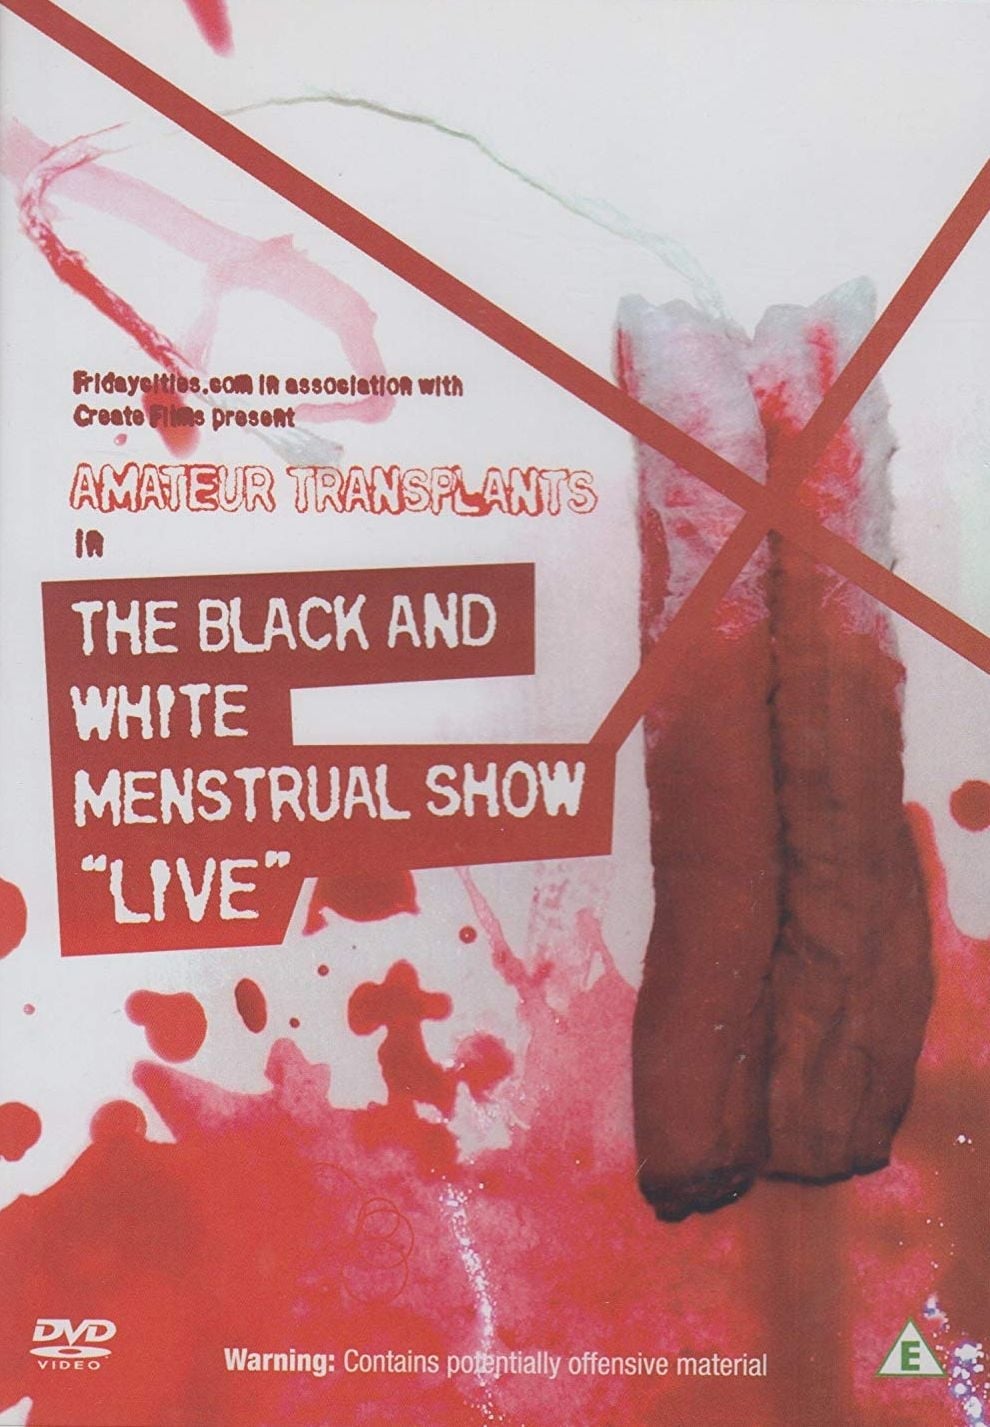 Amateur Transplants in The Black and White Menstrual Show